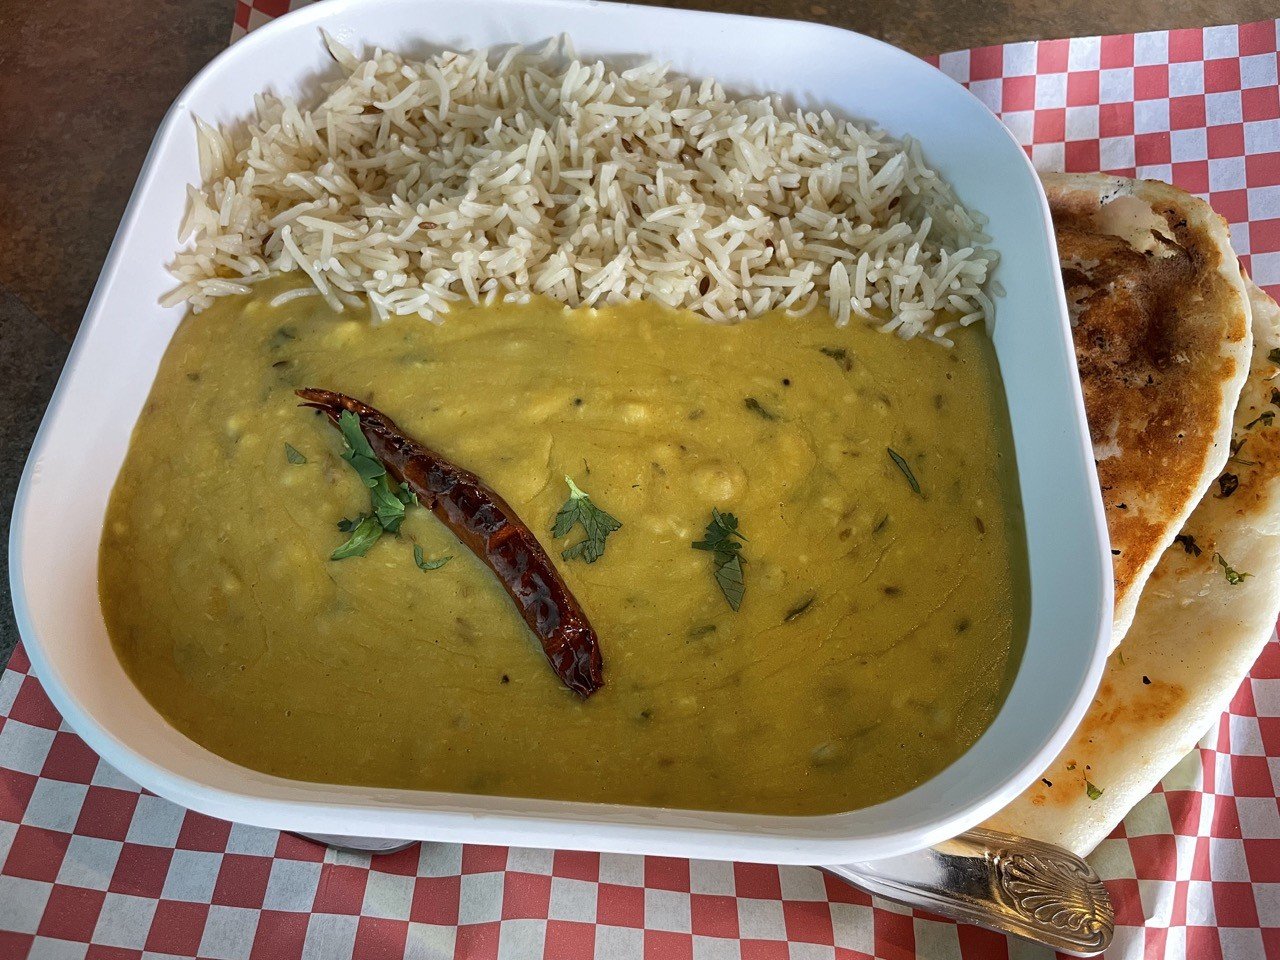 Dal Tadka is a classic Indian dish of yellow lentils and veggies simmered to a comforting porridge, with a spicy tadka mix of spices, chiles and oil stirred in to finish.